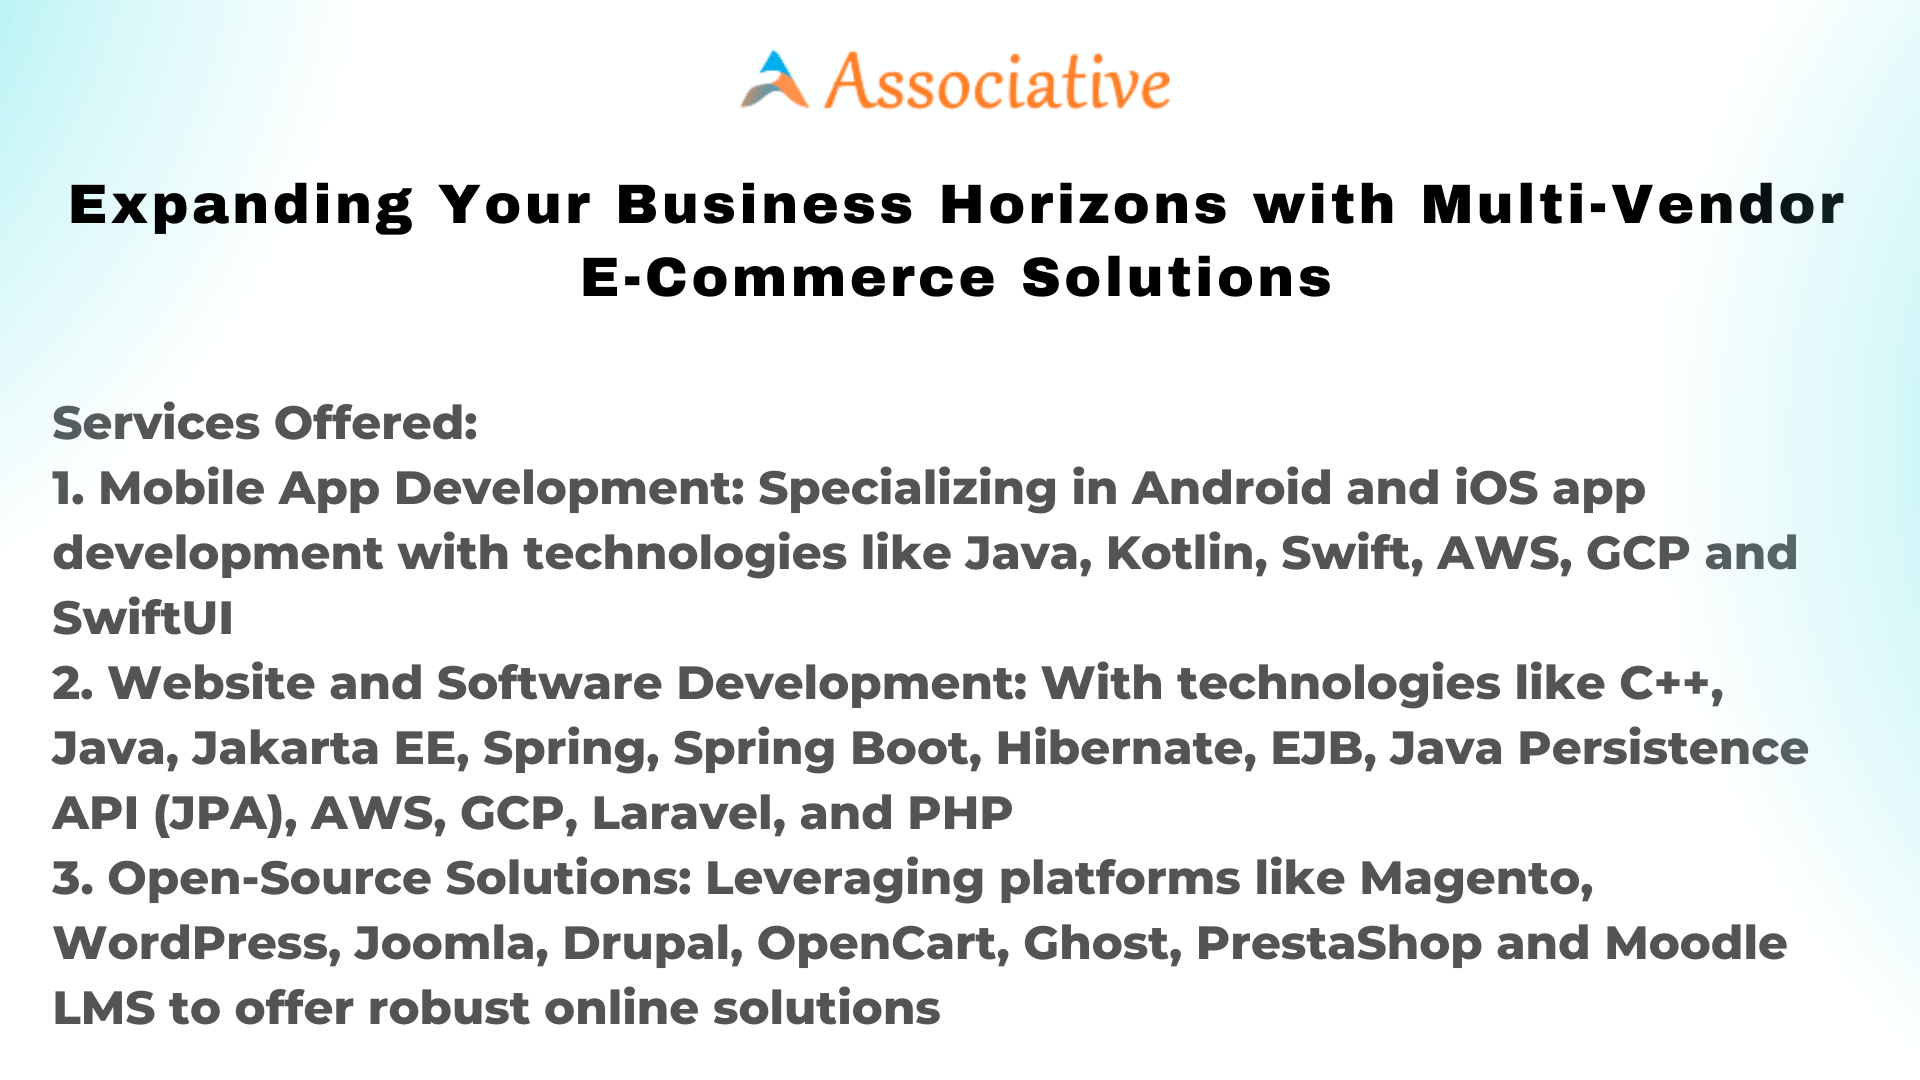 Expanding Your Business Horizons with Multi-Vendor E-Commerce Solutions